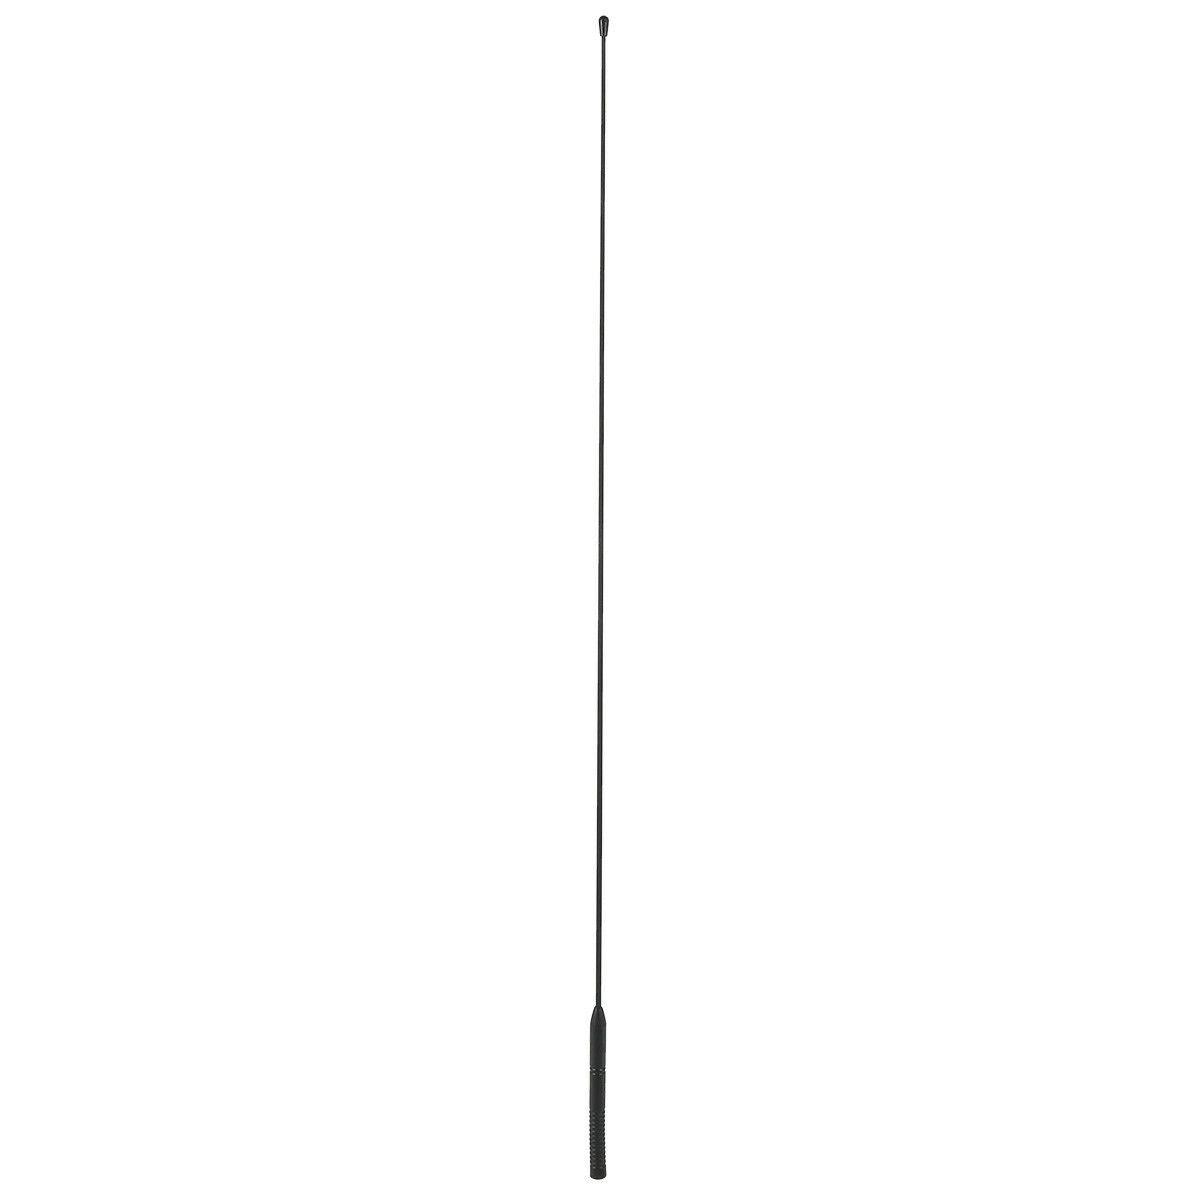 Black AM FM Antenna Fit For Harley Street Electra Glide Road King 1986-2020 2012 - Moto Life Products